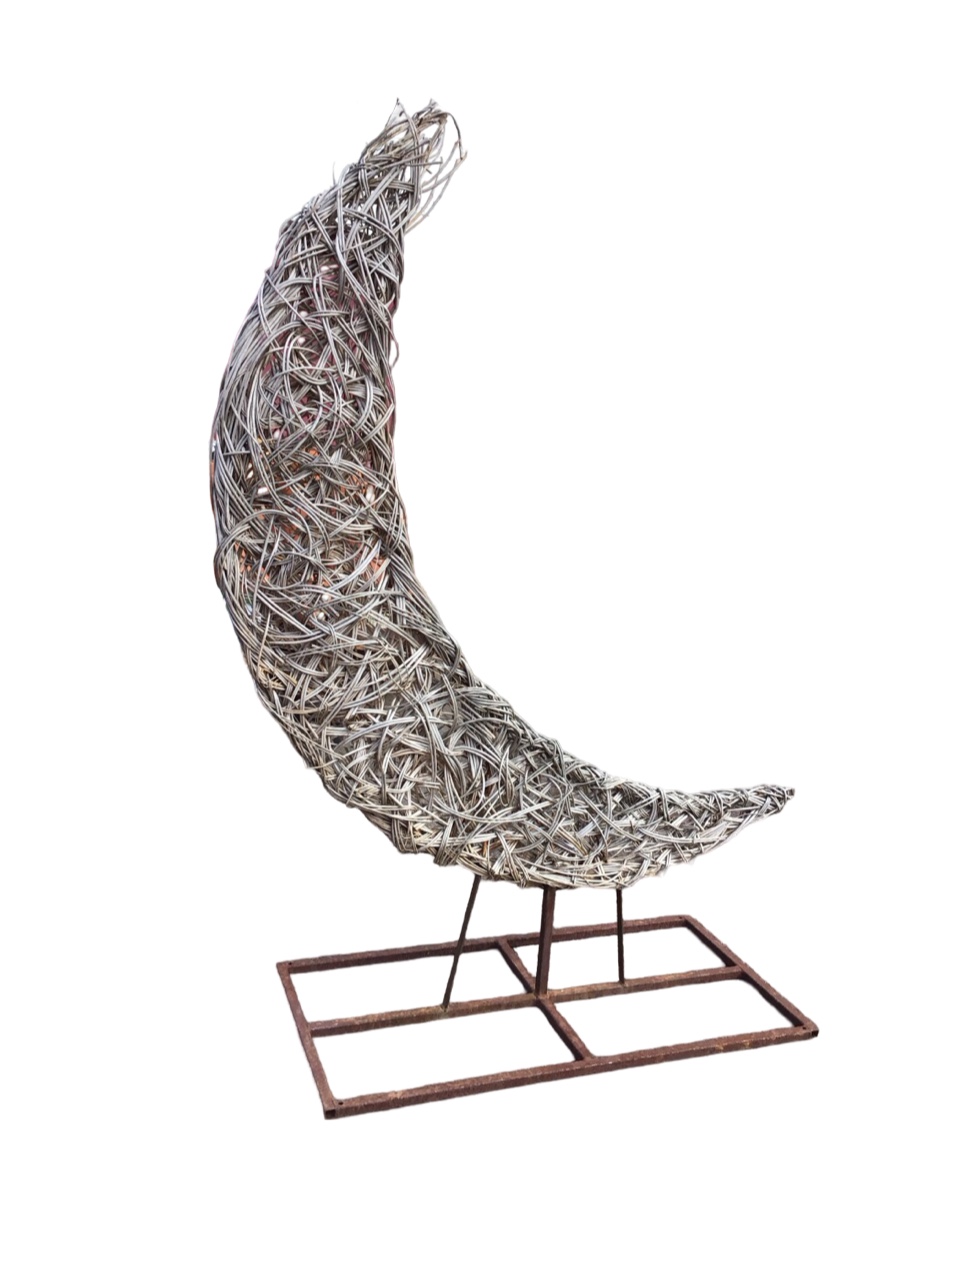 A woven willow crescent shaped sculpture on metal frame with rectangular stand. (80in)